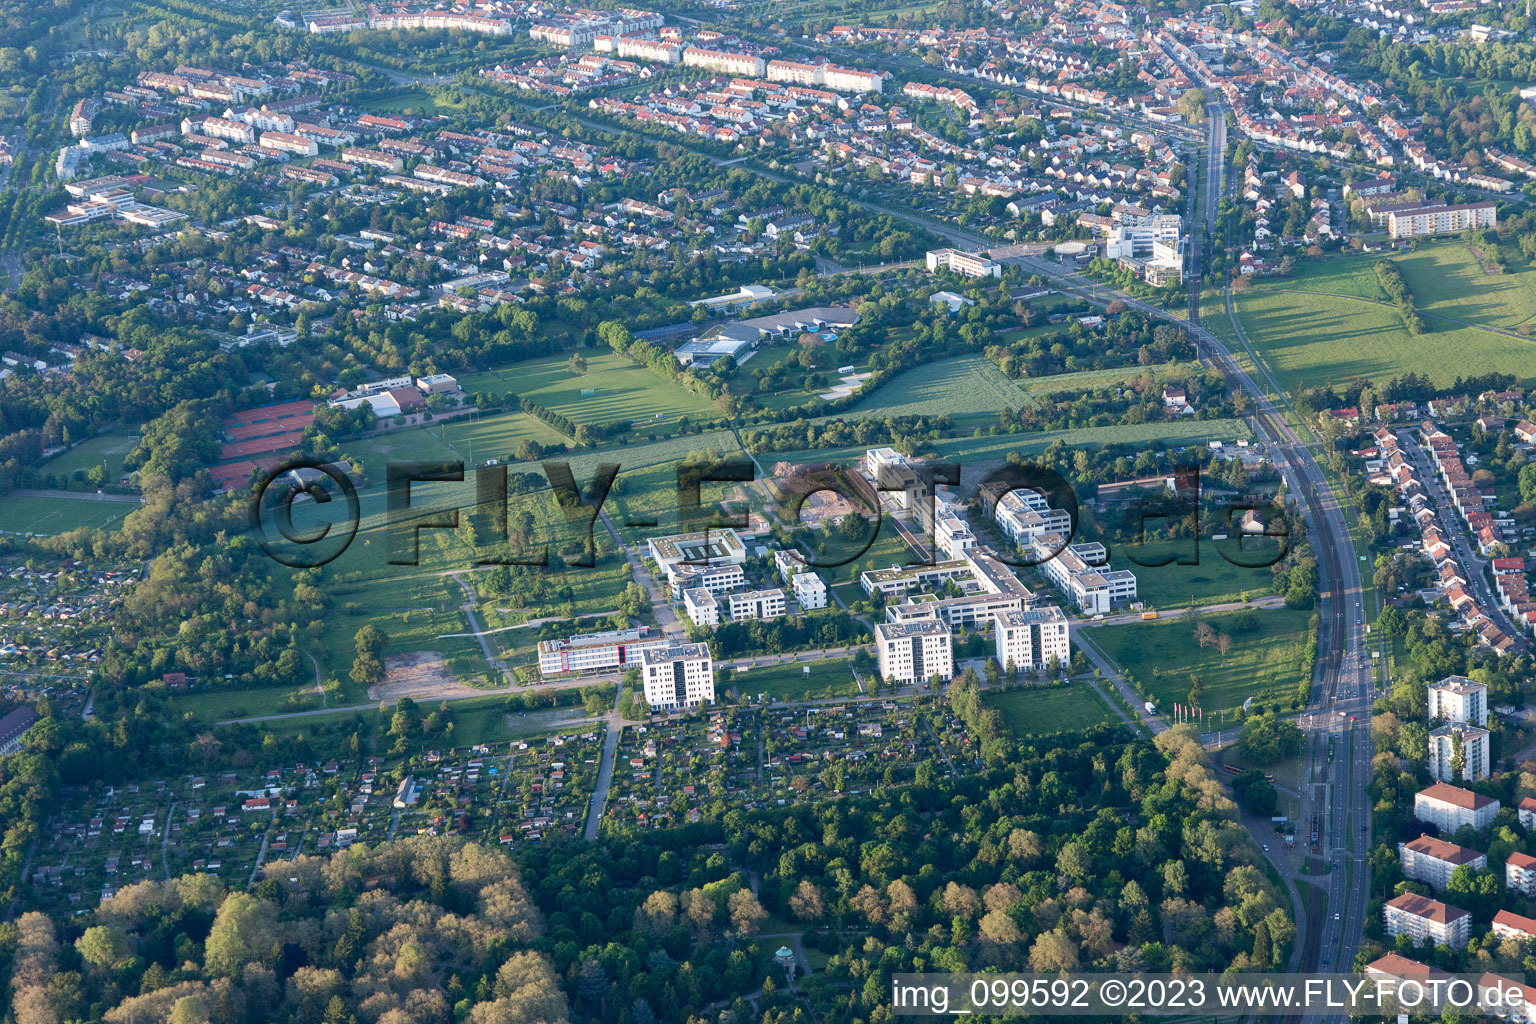 Drone image of District Rintheim in Karlsruhe in the state Baden-Wuerttemberg, Germany